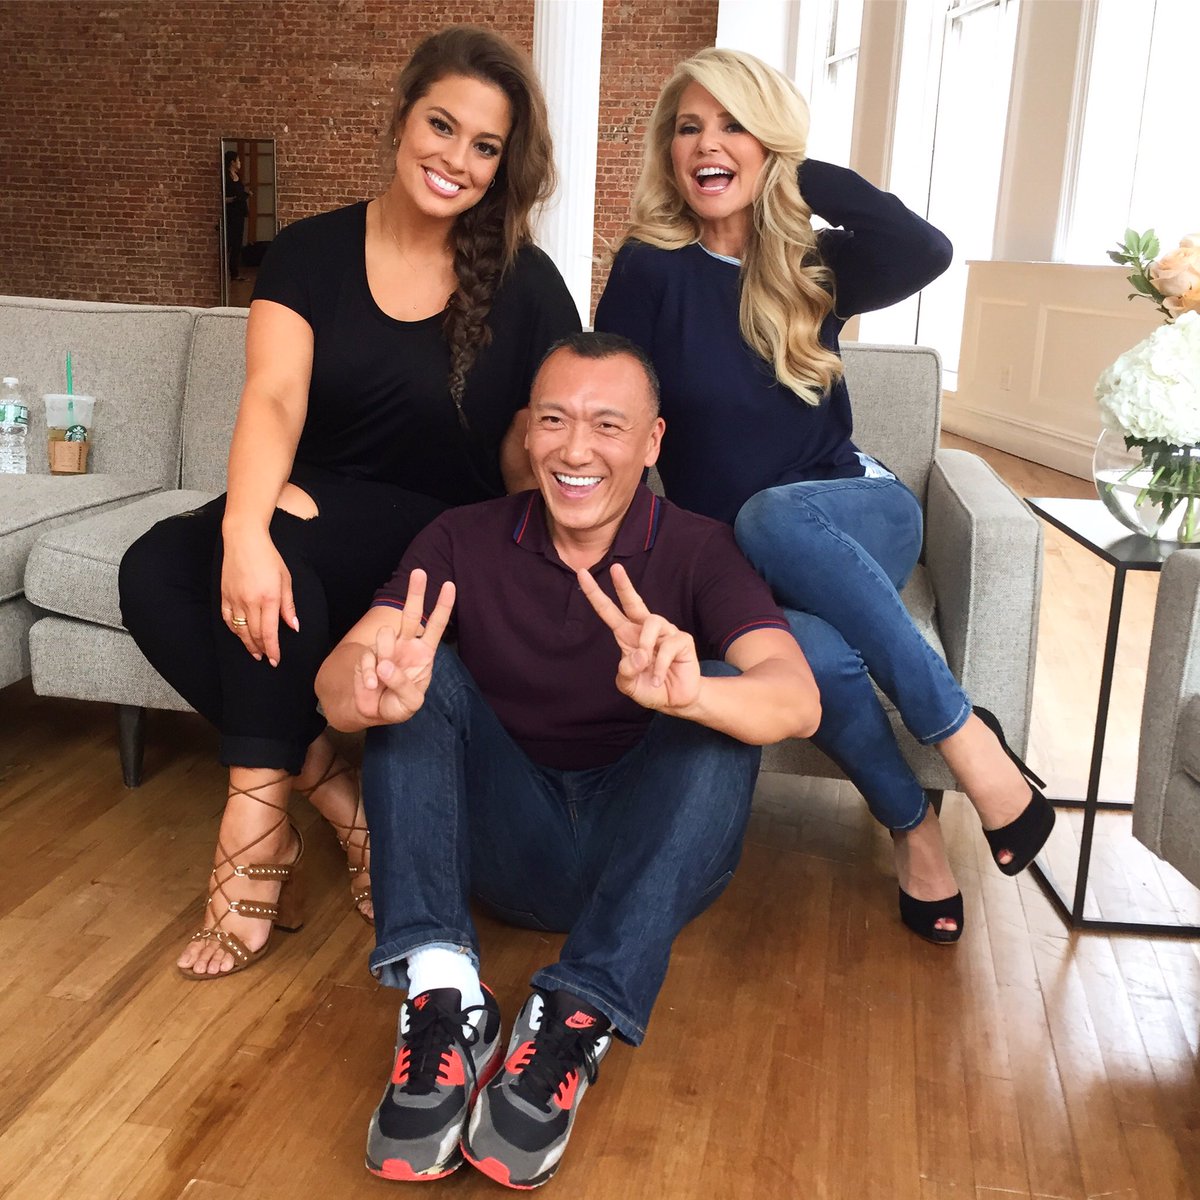 RT @mrjoezee: Sometimes you just need a double dose of beauty and brains. ???????? @YahooStyle @nydj @theashleygraham @SeaBrinkley https://t.co/m…